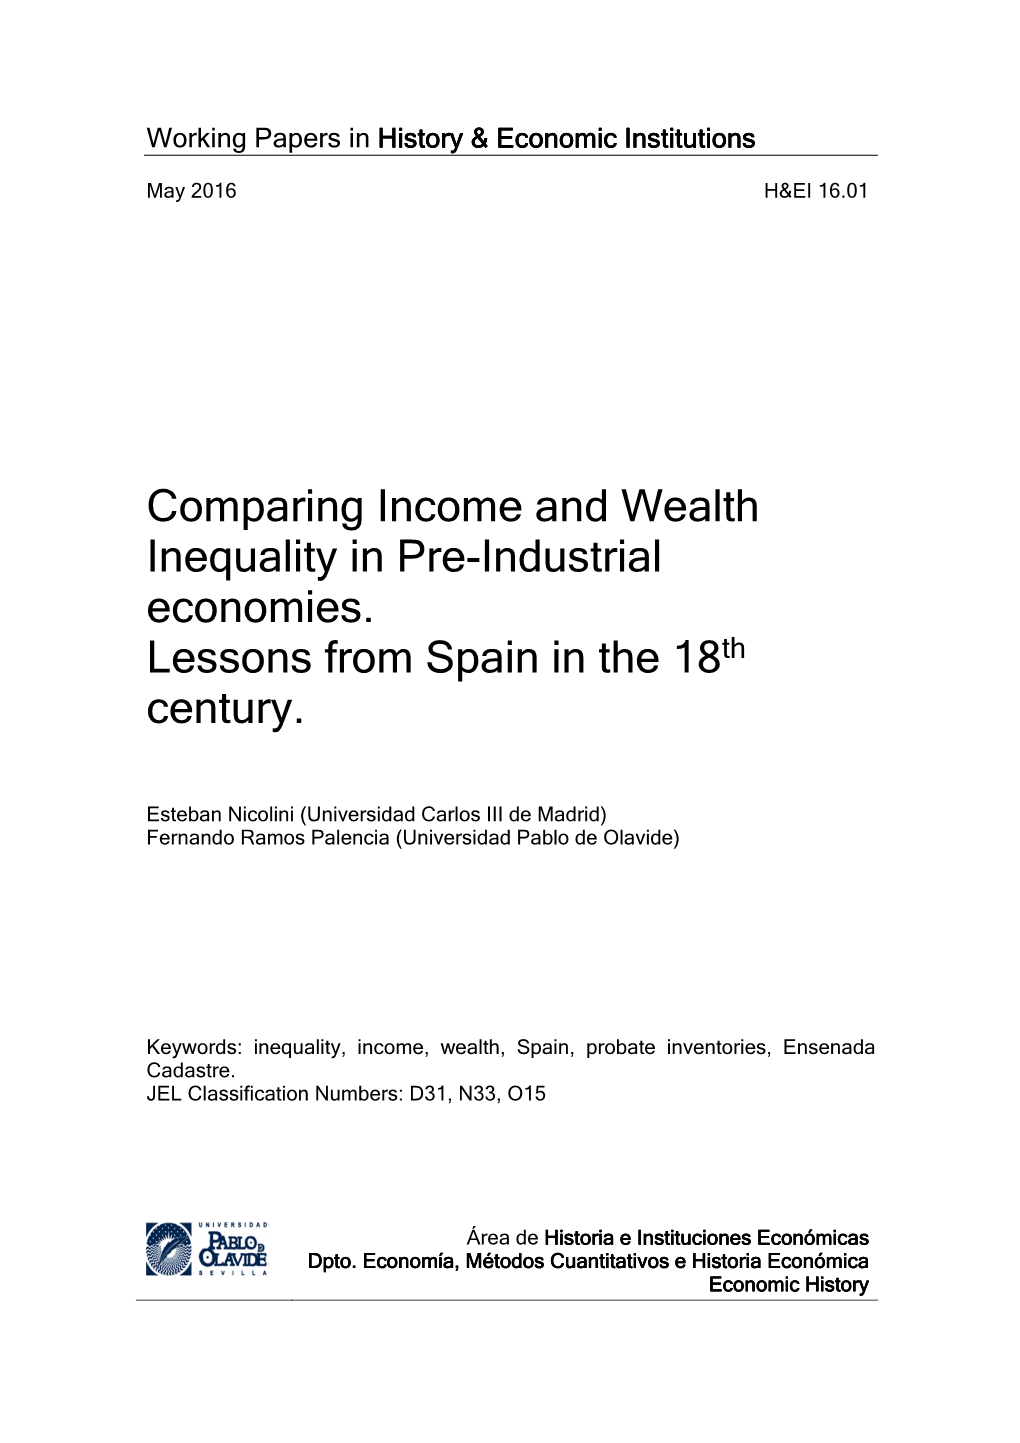 Comparing Income and Wealth Inequality in Pre-Industrial Economies